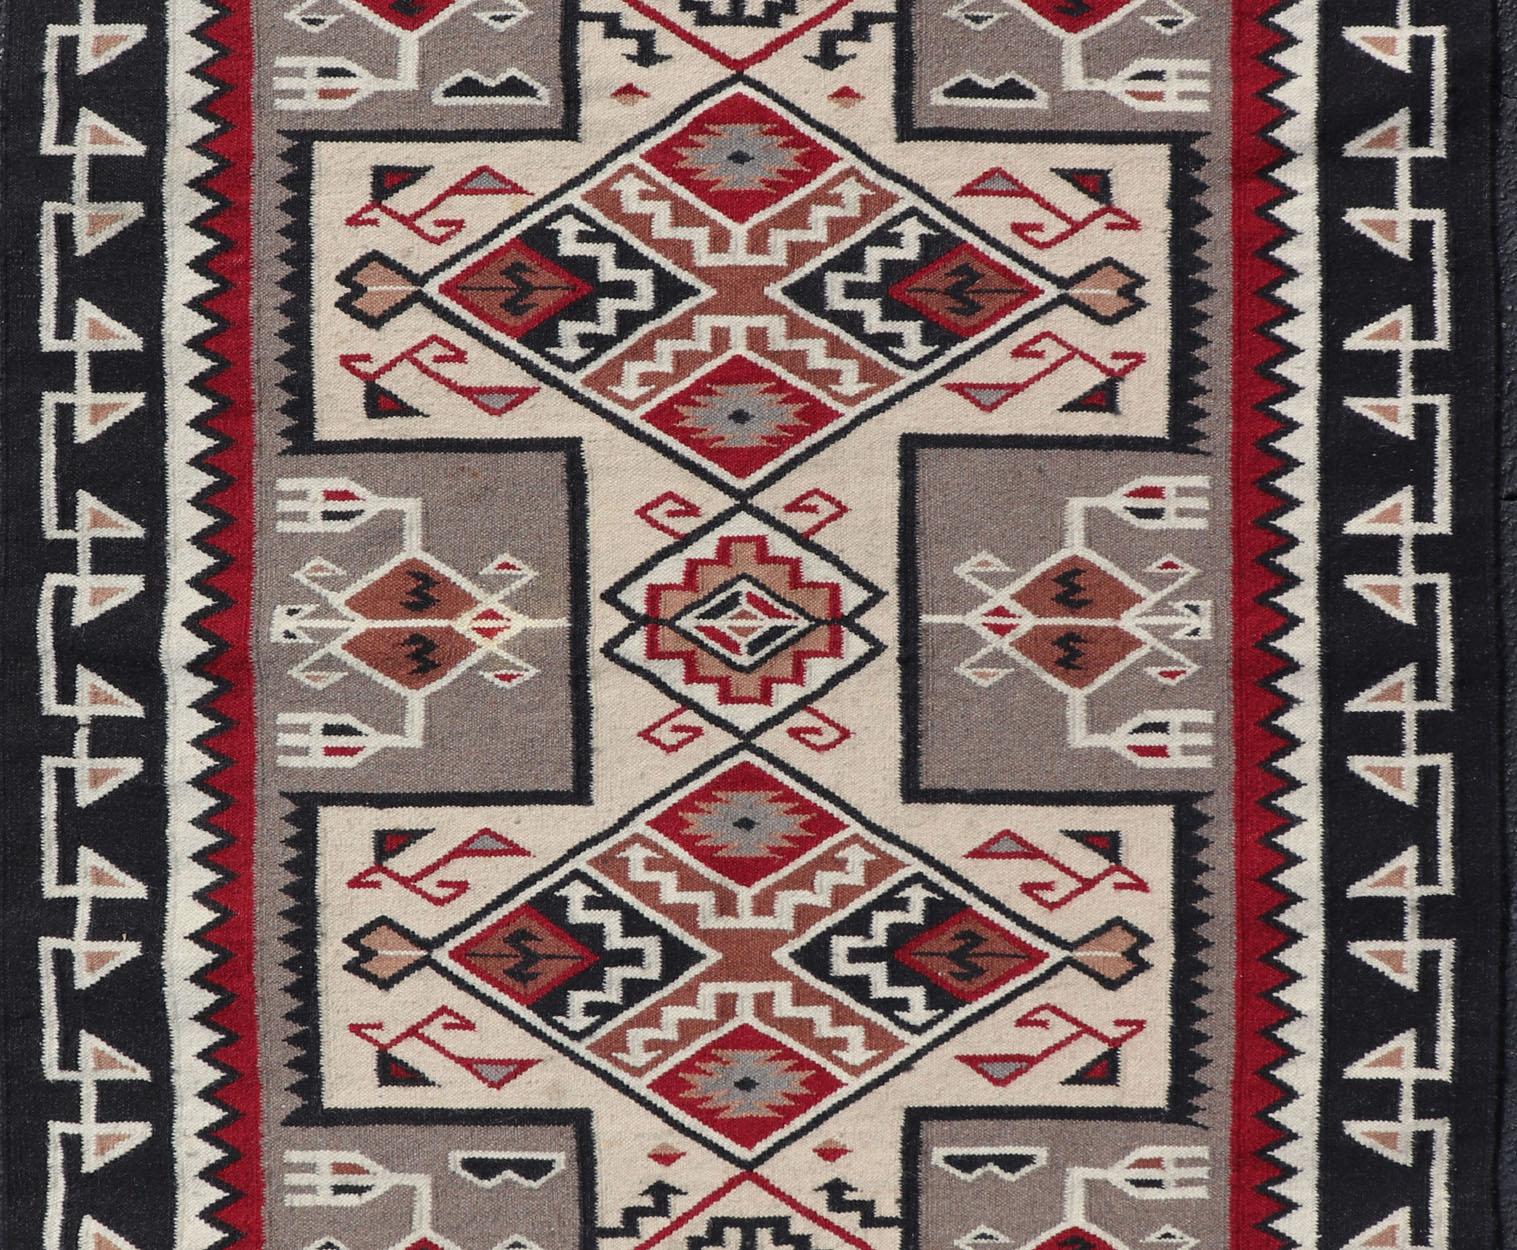 Vintage hand woven Navajo style rug in gray, ivory, black, and red.  Rug/ X23-0104, country of origin / type: America / Navajo, circa 1980
Measures : 4'0 x 6'0
This intriguing vintage Navajo rug was woven during the late 20th century. The exciting